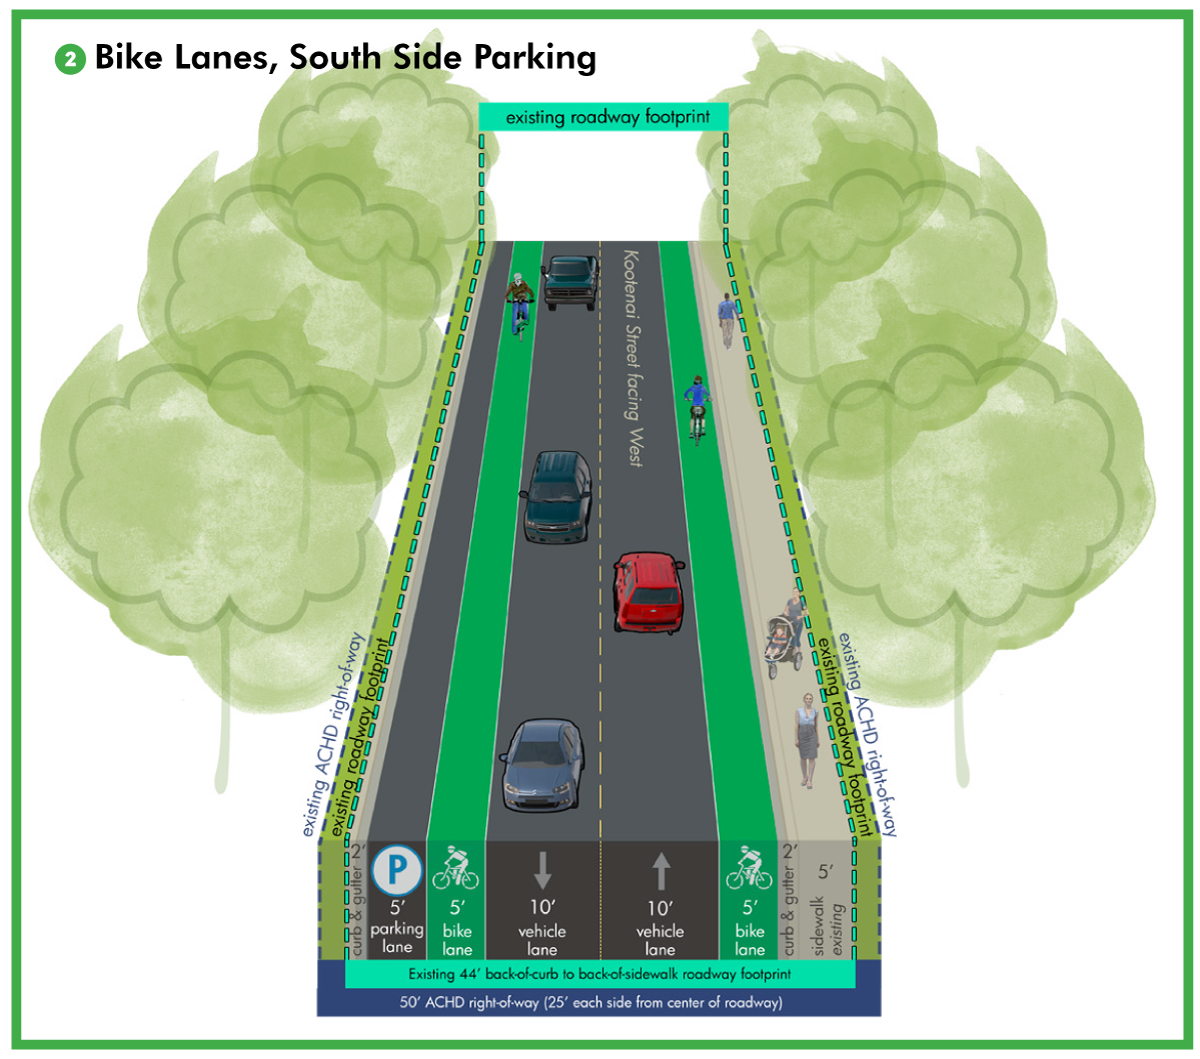 Cross-section of the project corridor with use of bike lanes on the osuth side as a traffic calming option.